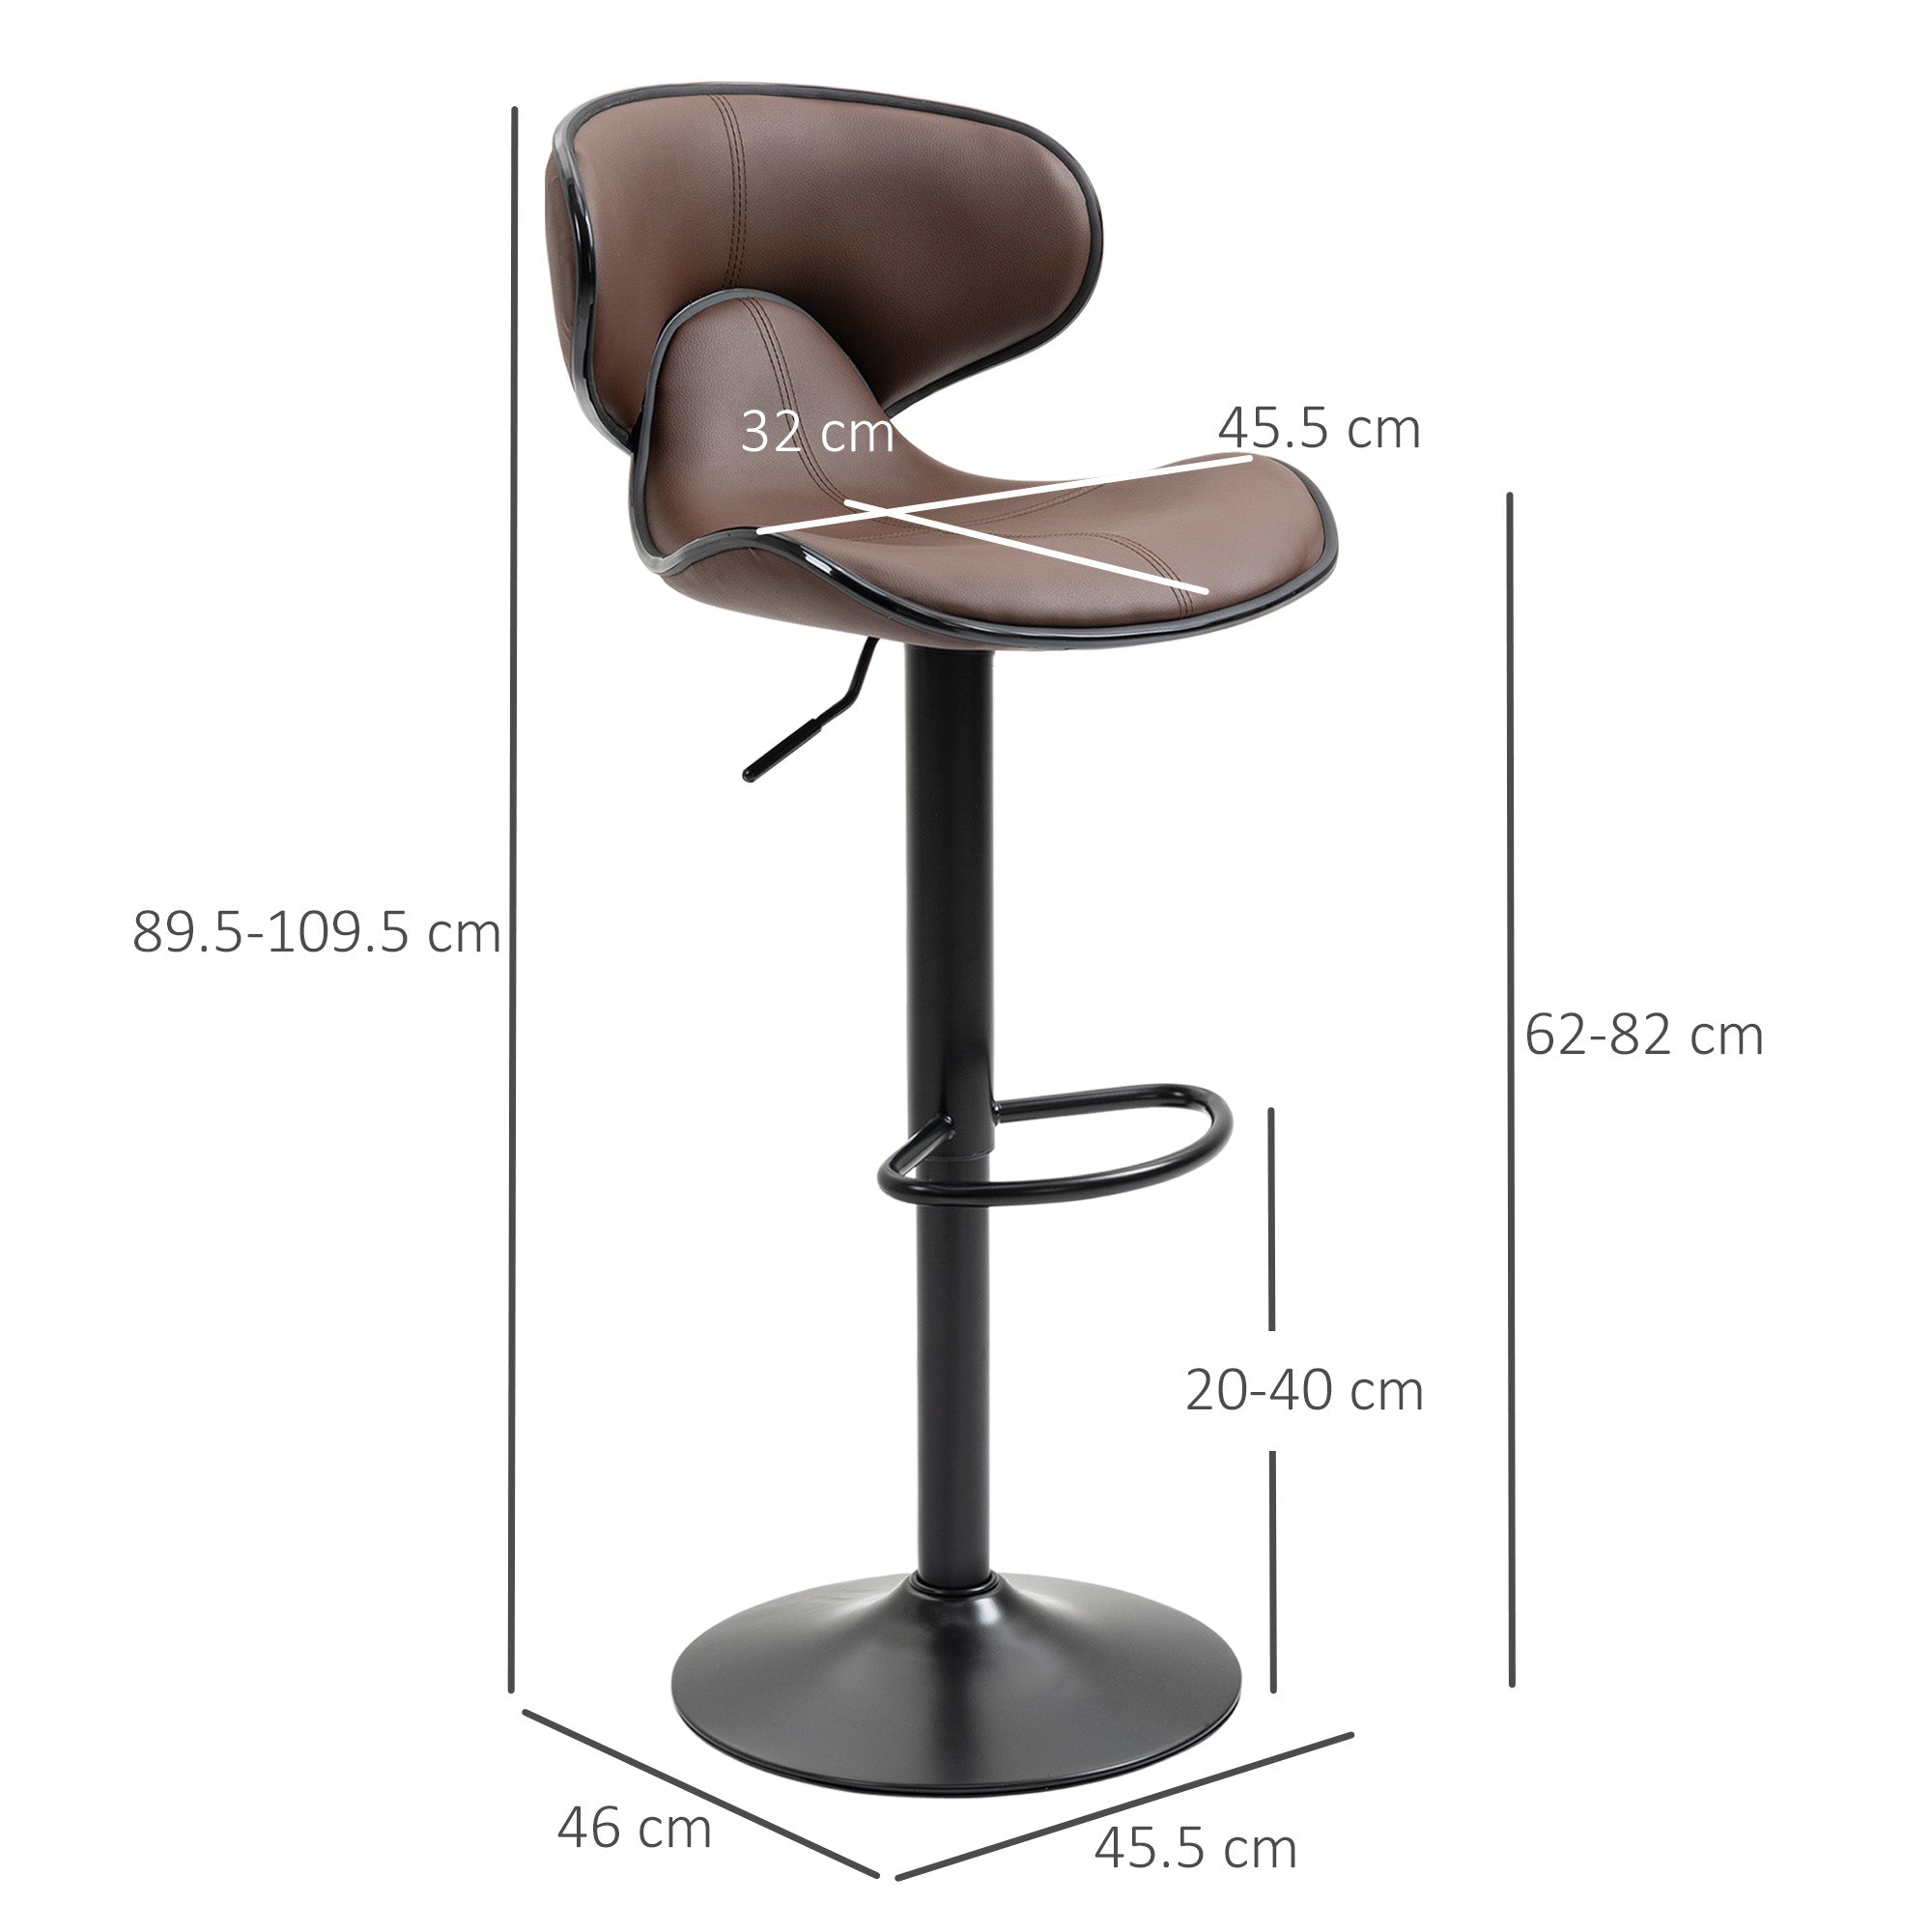 Adjustable Swivel Bar Stools Set of 2, Barstools with Footrest and Backrest, Steel Frame Gas Lift, for Kitchen Counter Dining Room, Brown  AOSOM   